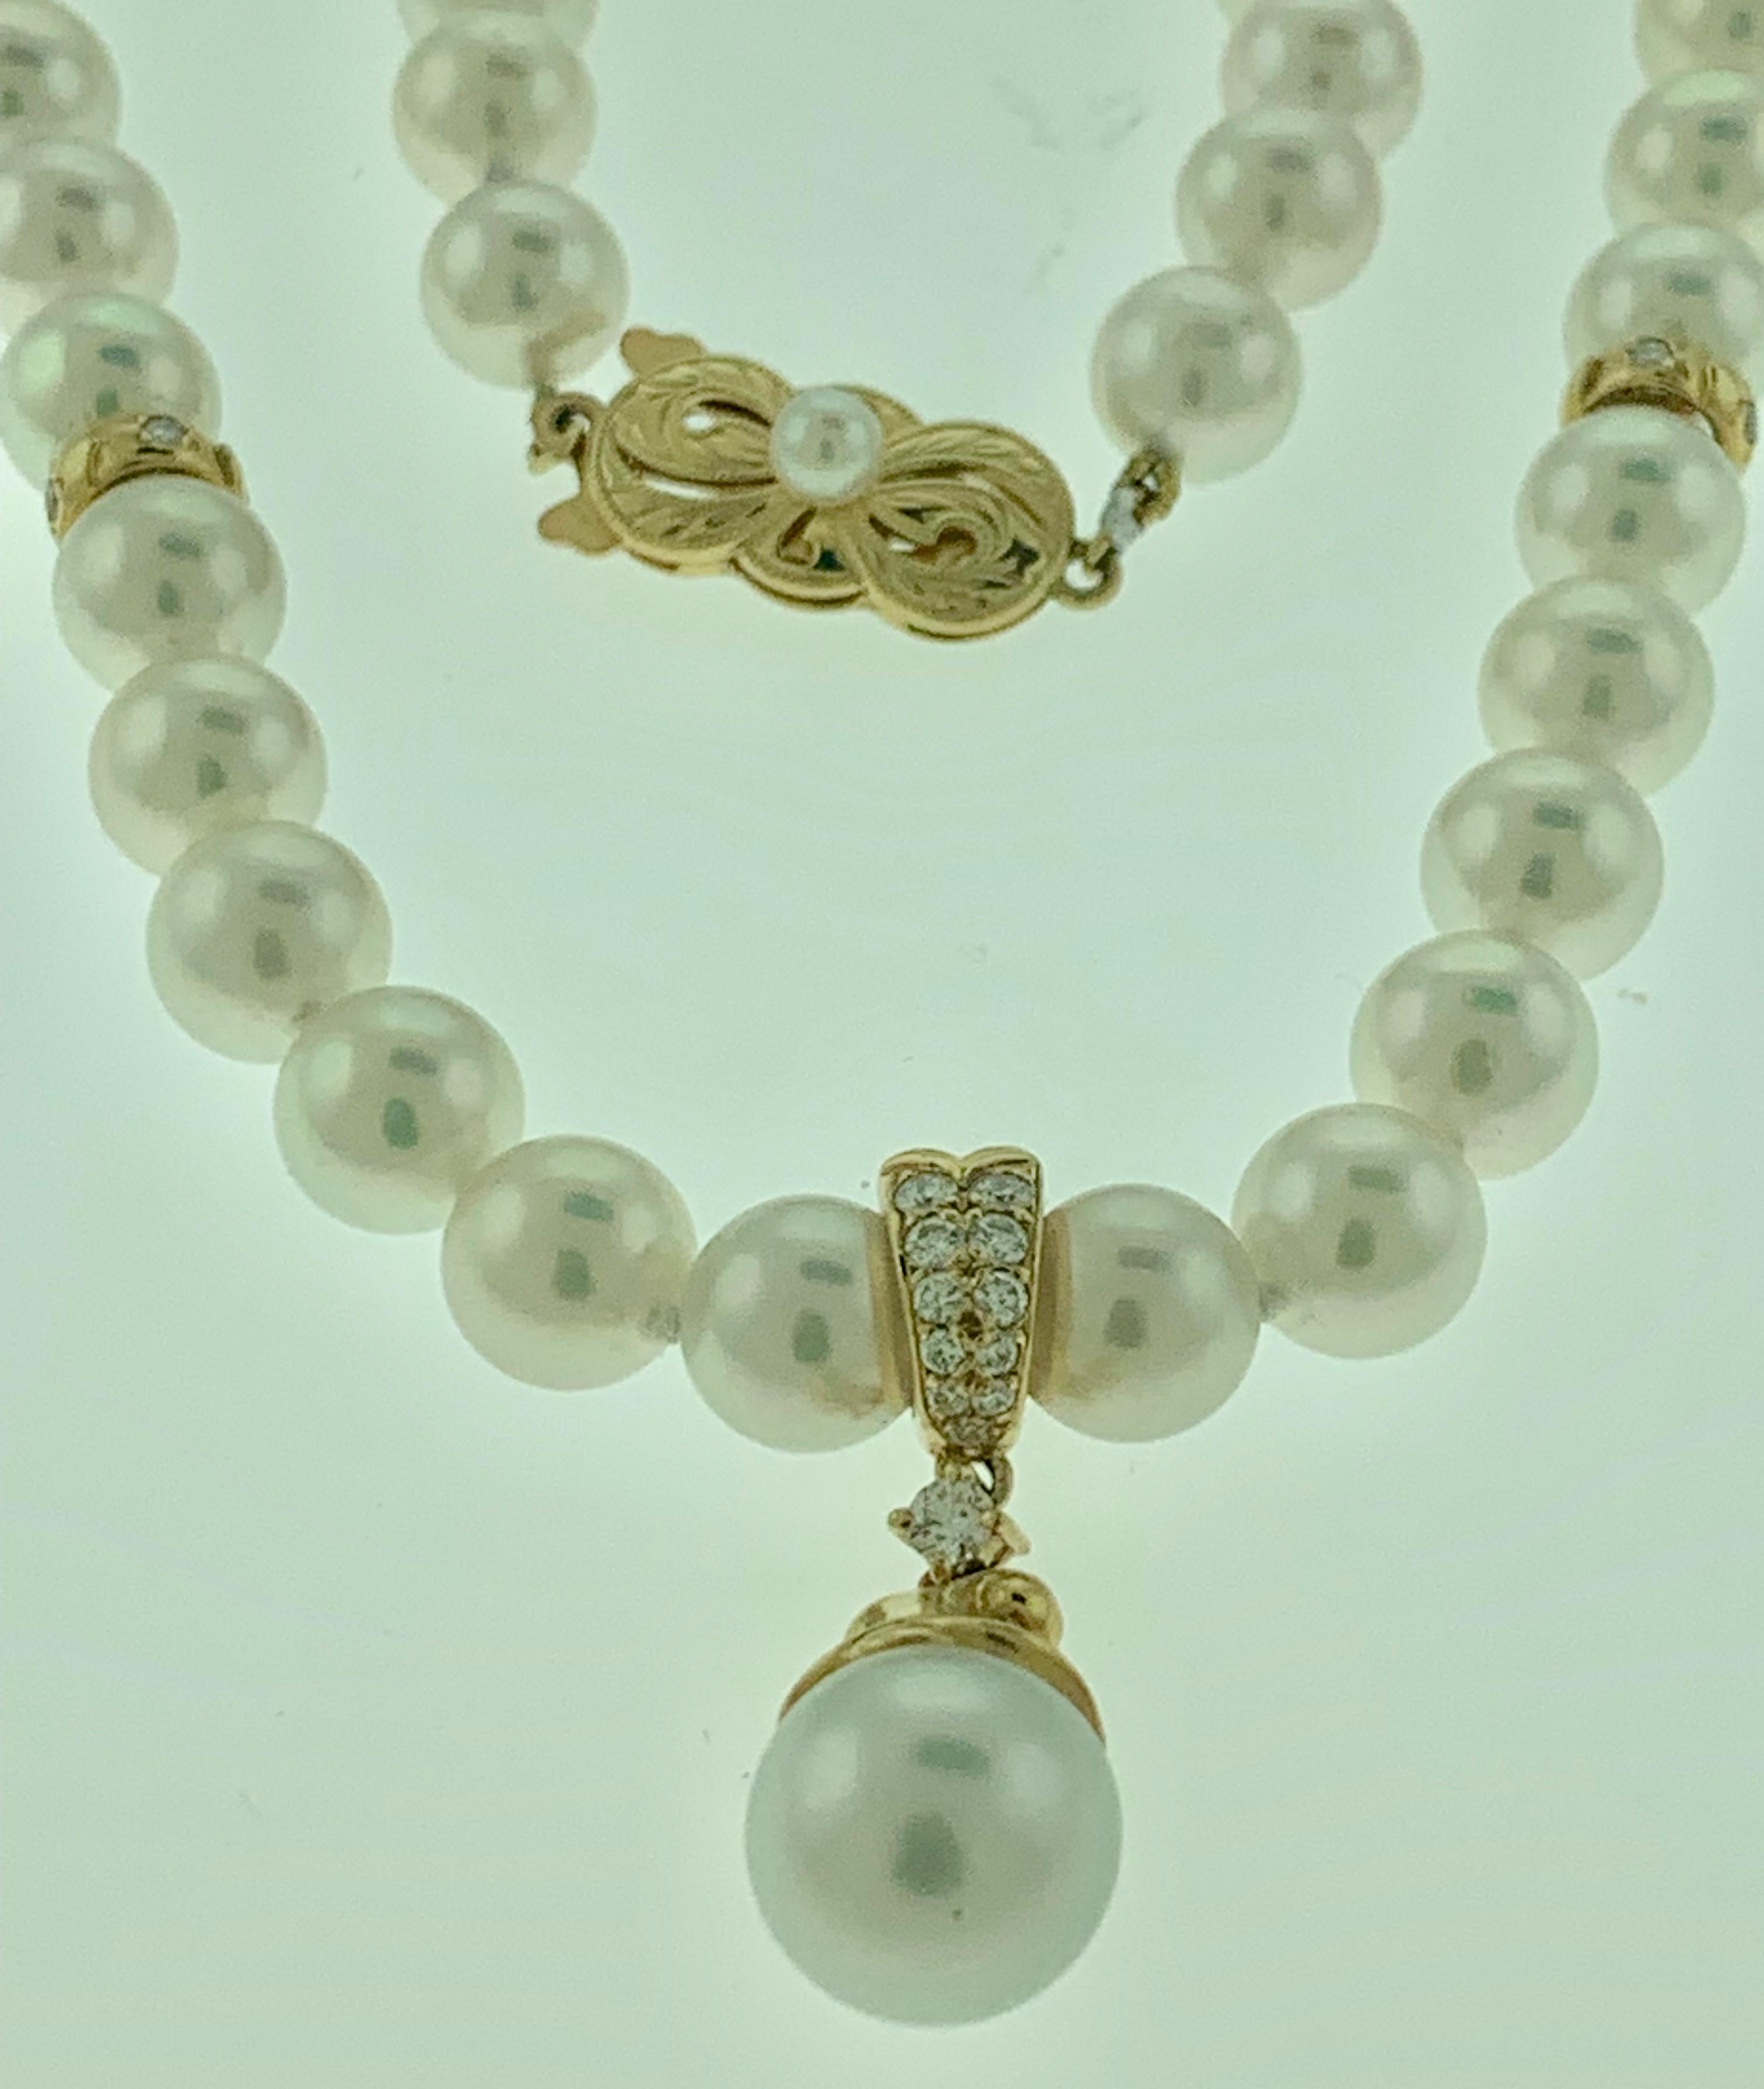 A vintage Mikimoto Akoya cultured pearl single-strand necklace with a diamond   pendant and gold and pearl clasp in 18-karat Yellow gold. The necklace is composed of 57 Akoya cultured pearls of an incredibly high luster  and significant size